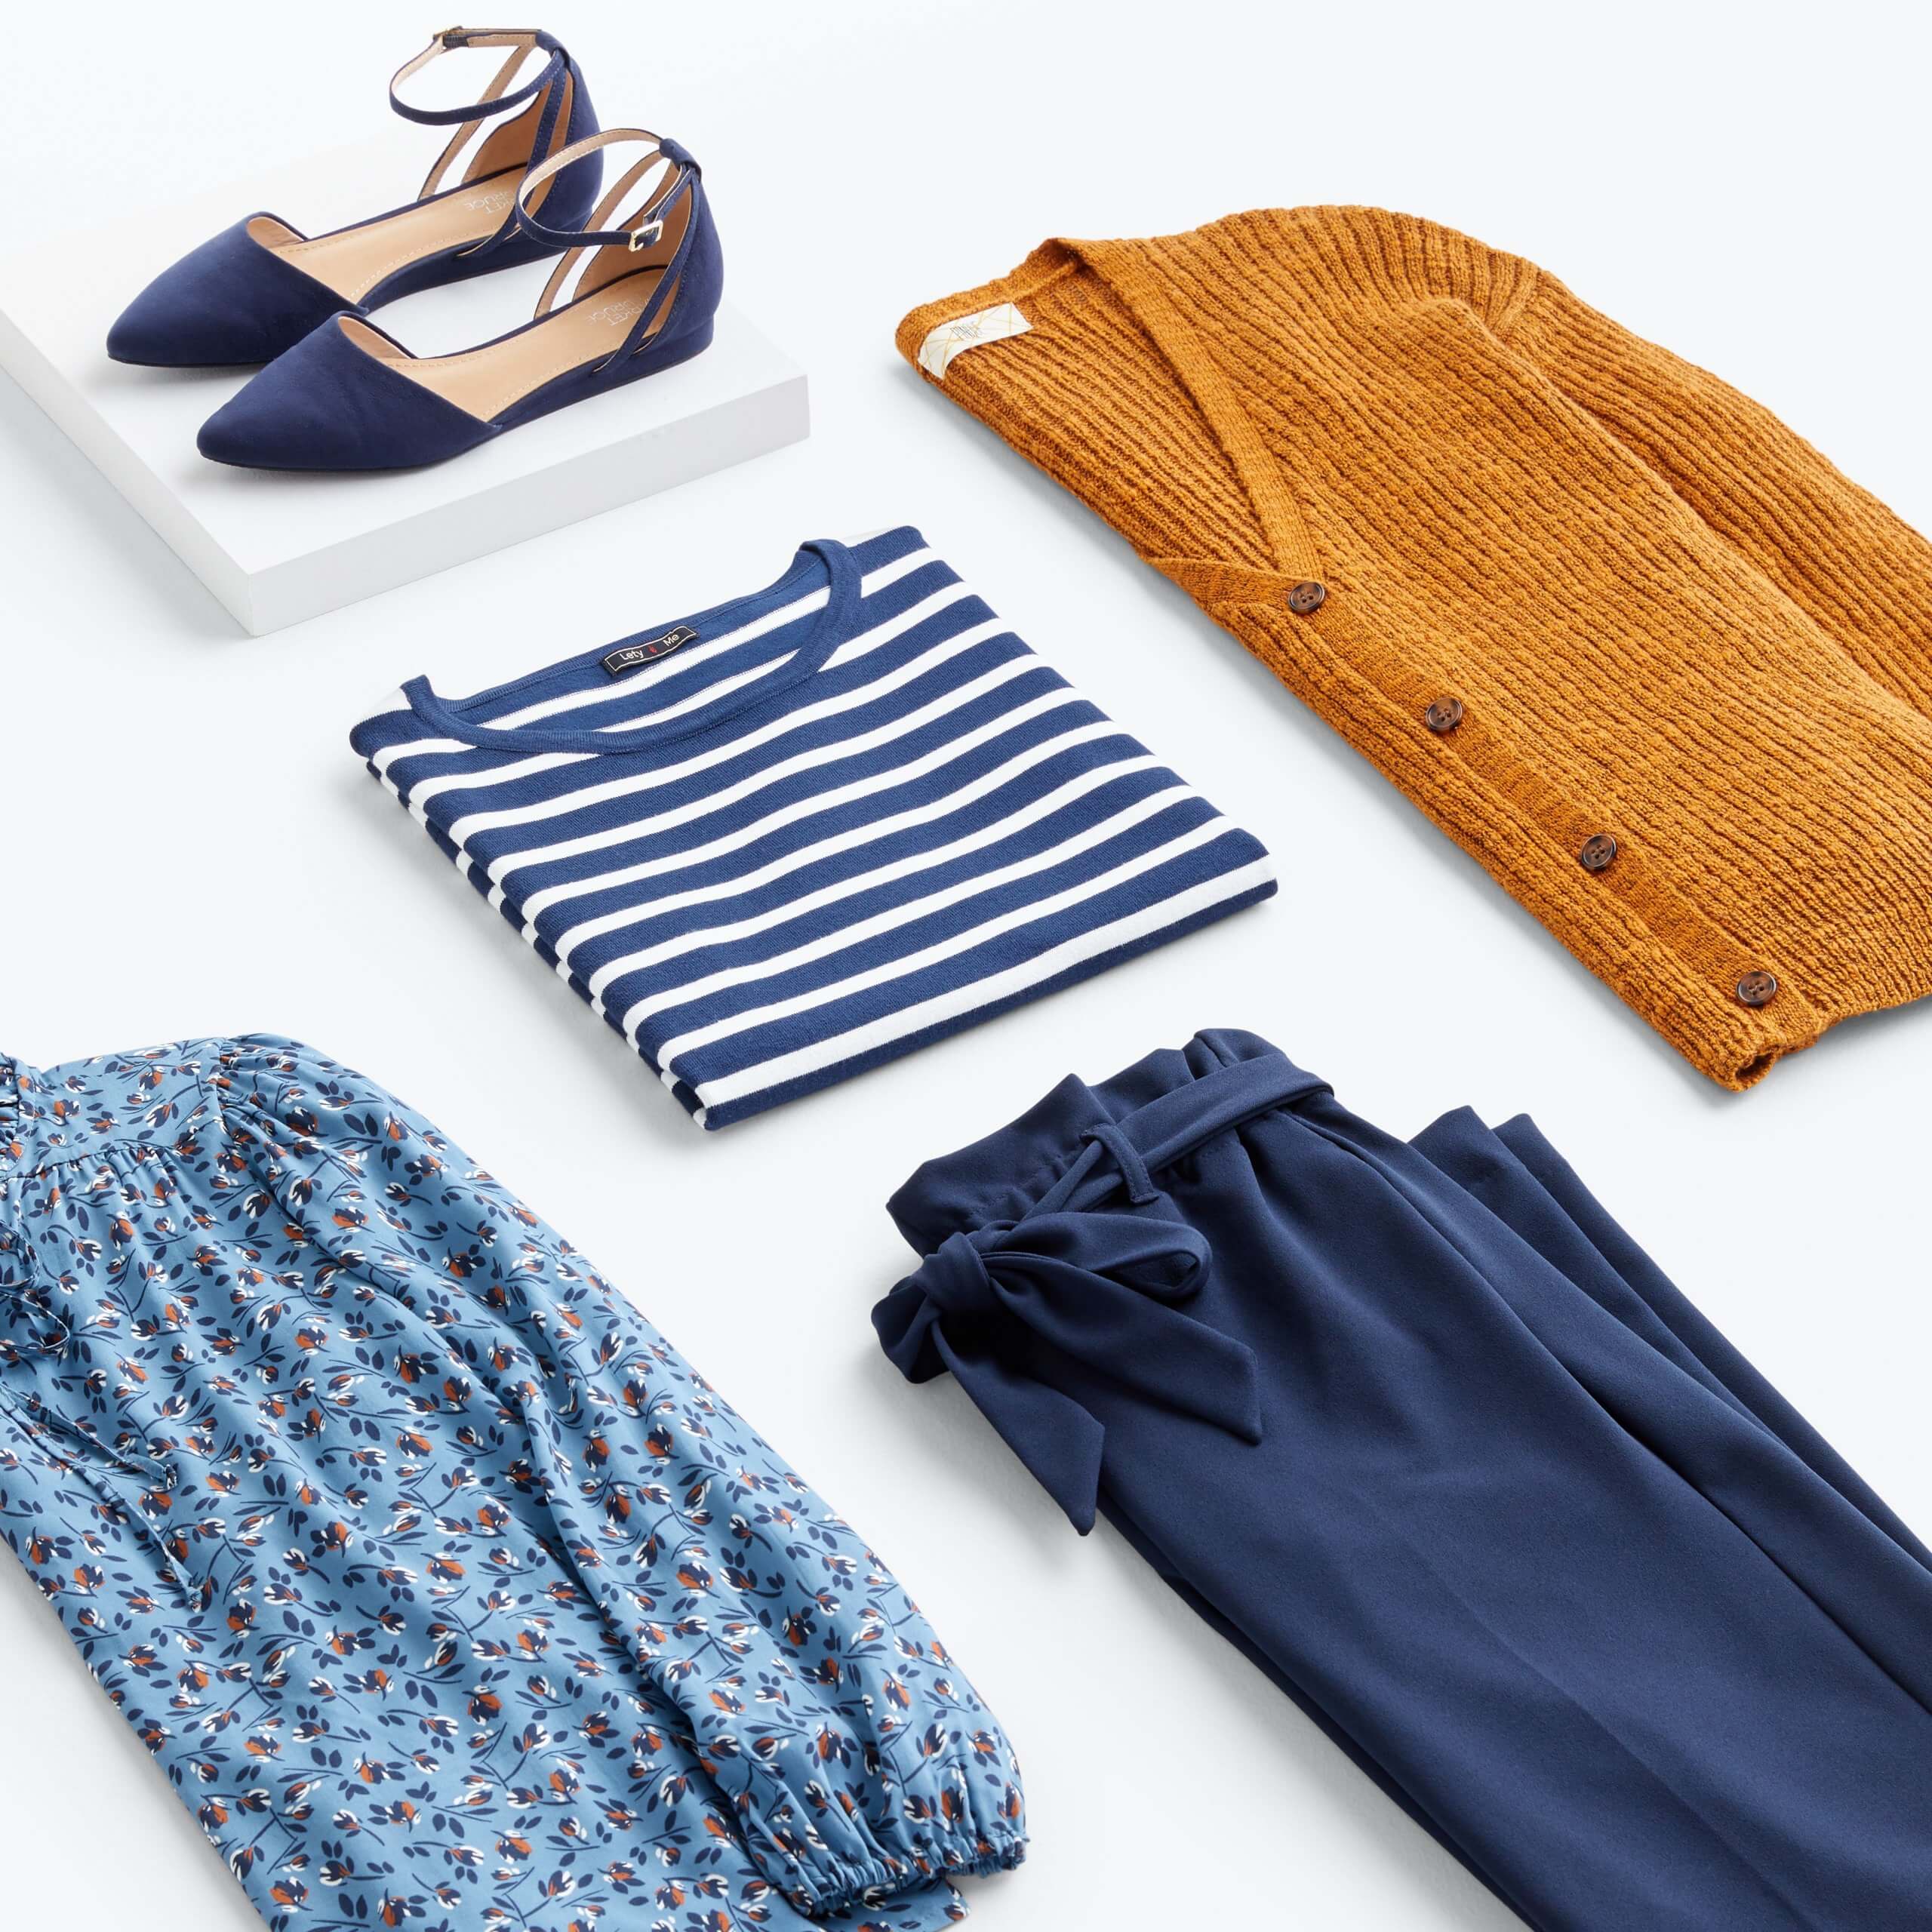 Stitch Fix women’s fall 2021 outfit with blue and white striped T-shirt, mustard cardigan, blue floral blouse, navy pants and flats.